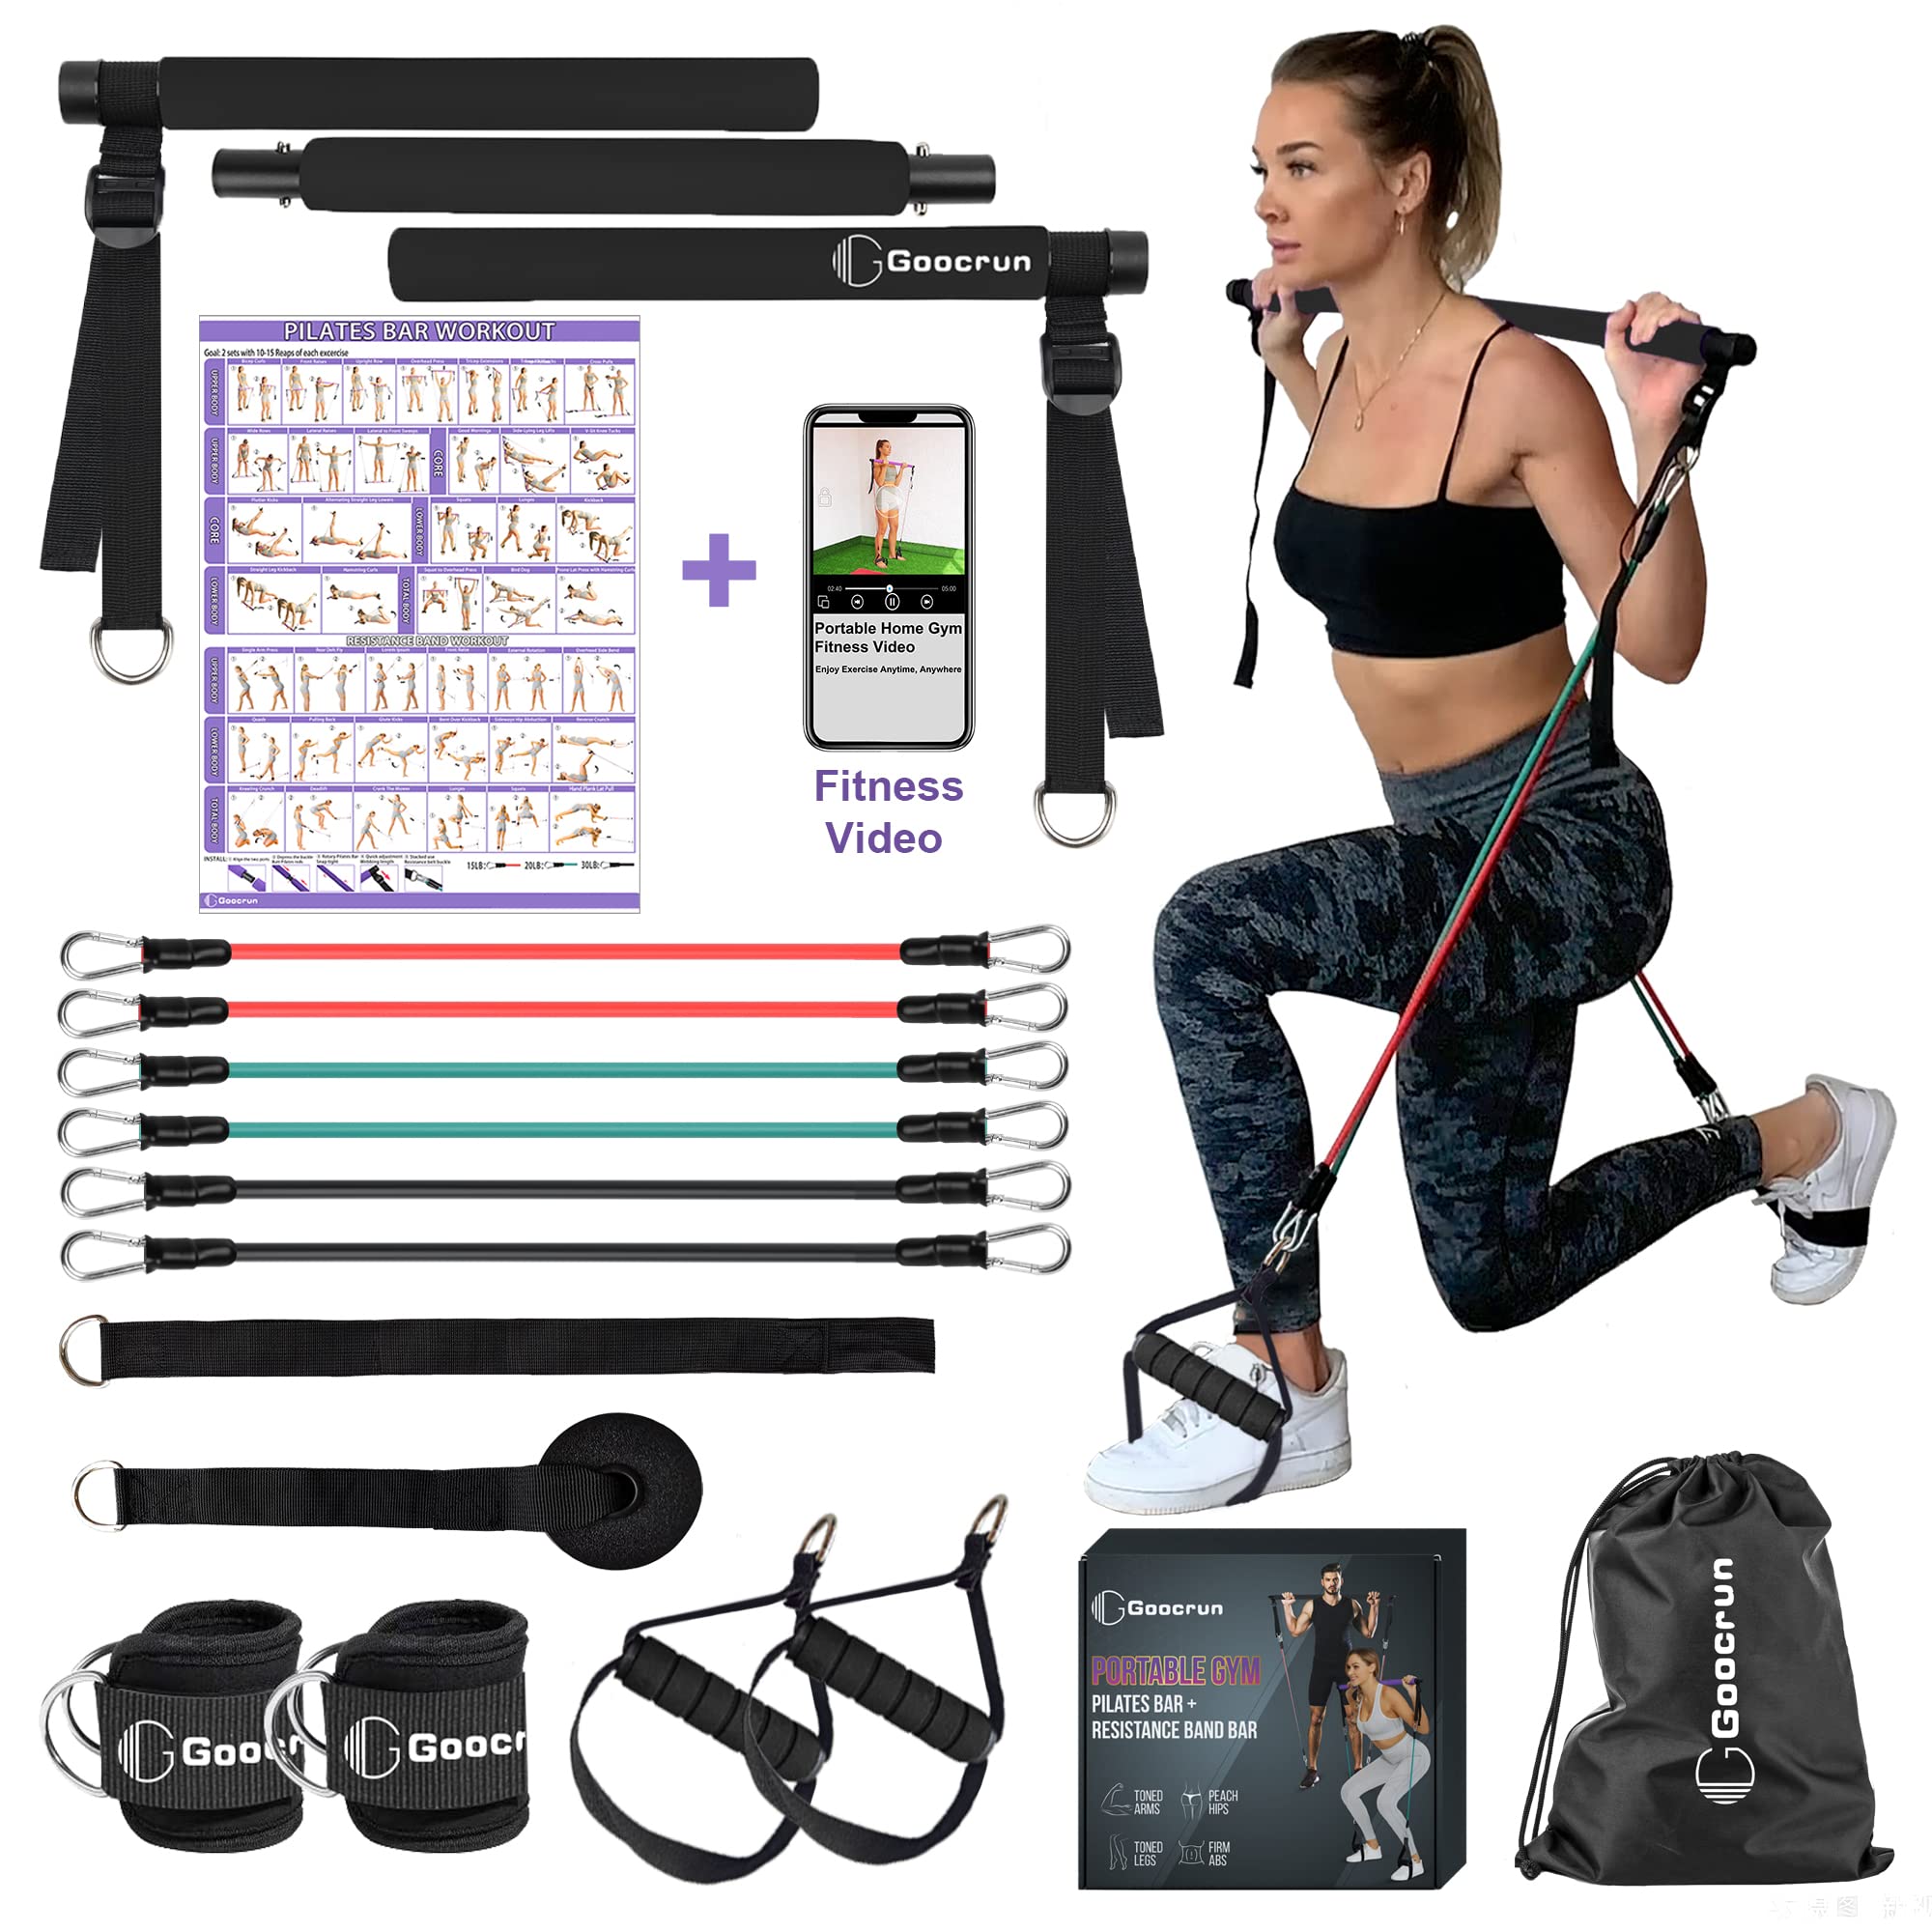 Portable Home Gym, Pilates Bar & Resistance Band Bar Combo Set.  Multifunctional Fitness Equipment That Supports Full-Body Workouts - with  Workout Video Black